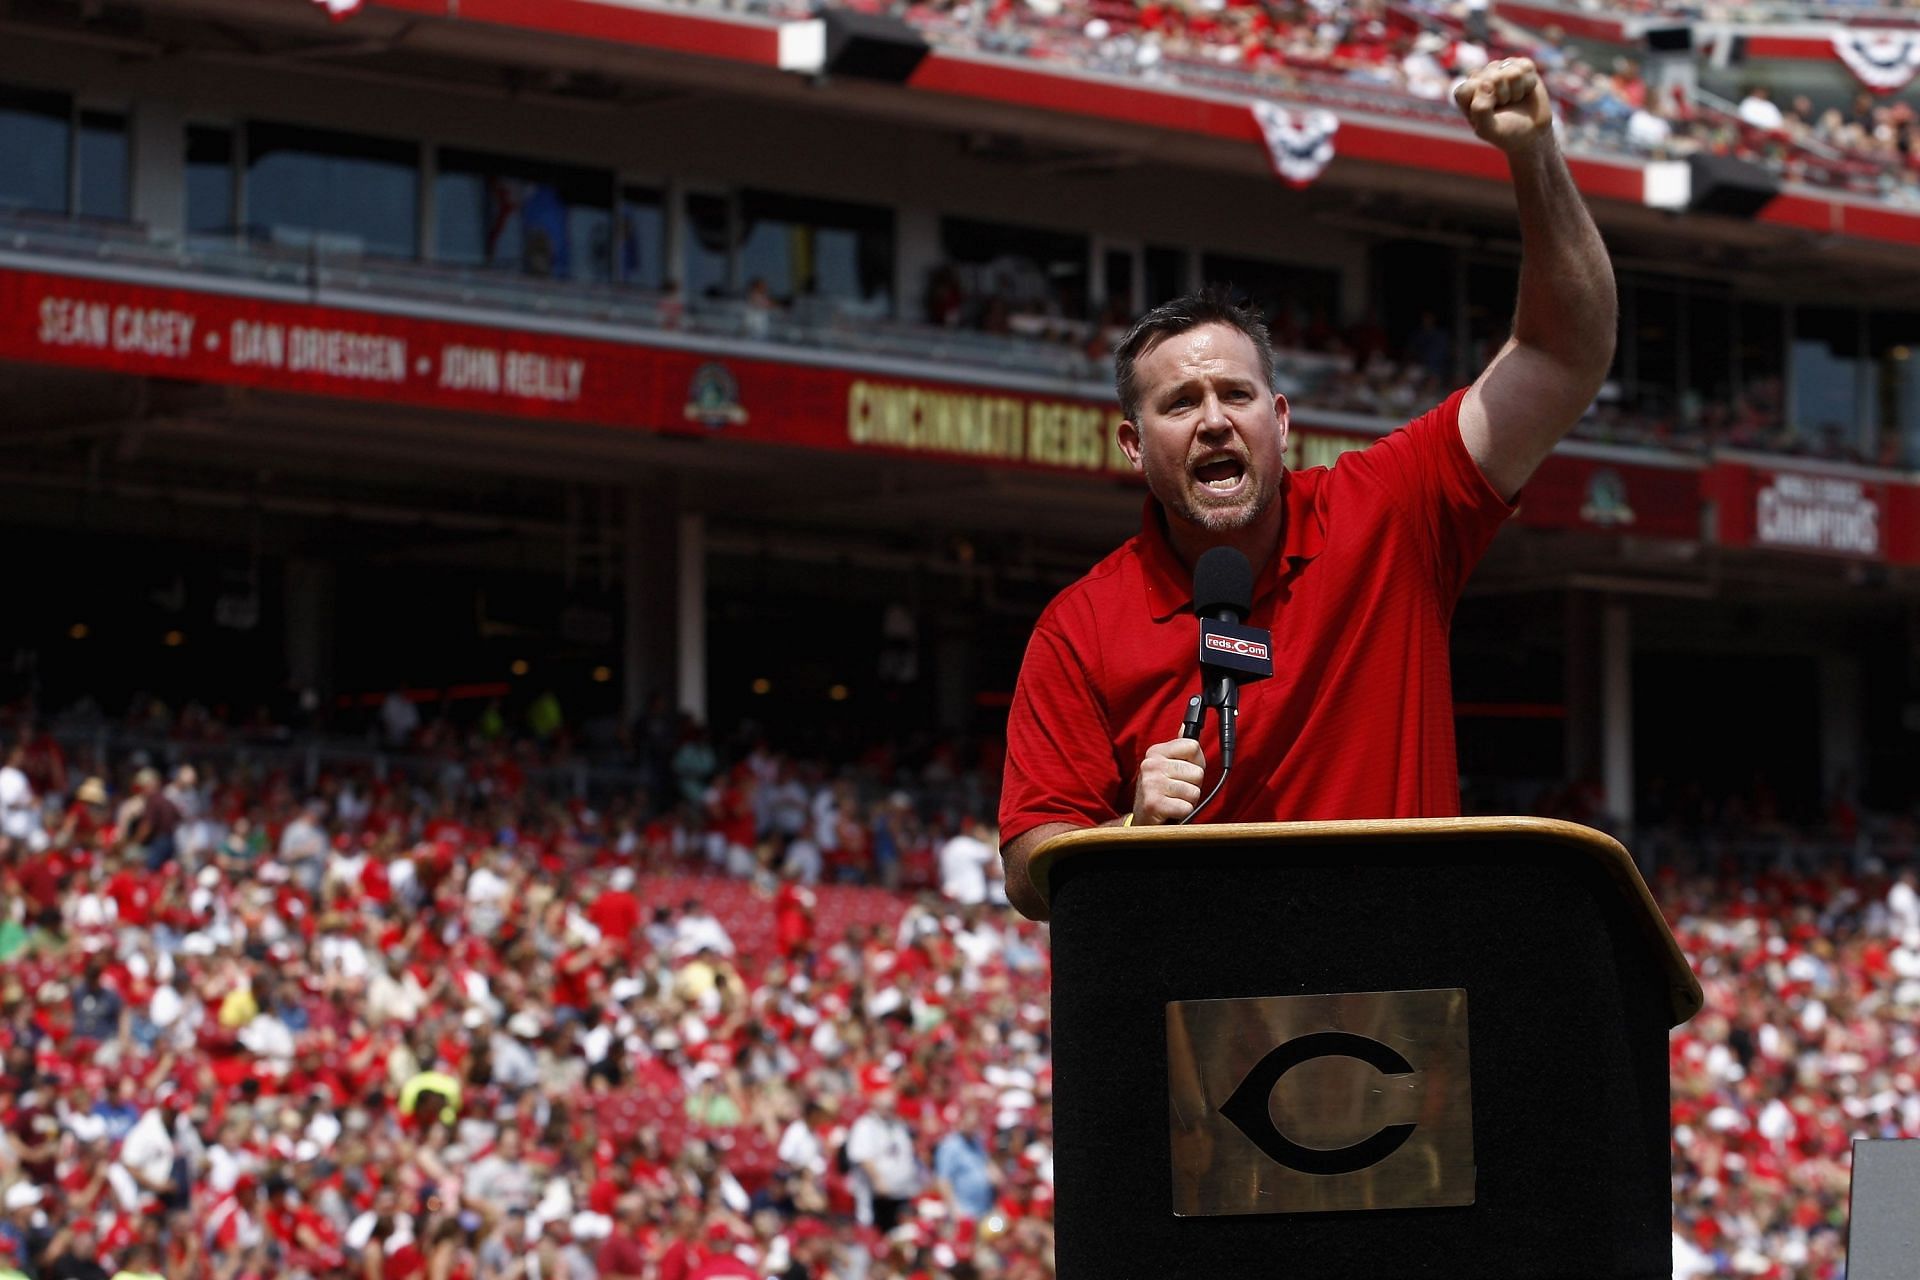 Cincinnati Reds Hall of Fame Inductee Sean Casey addresses the crowd at Great American Ball Park